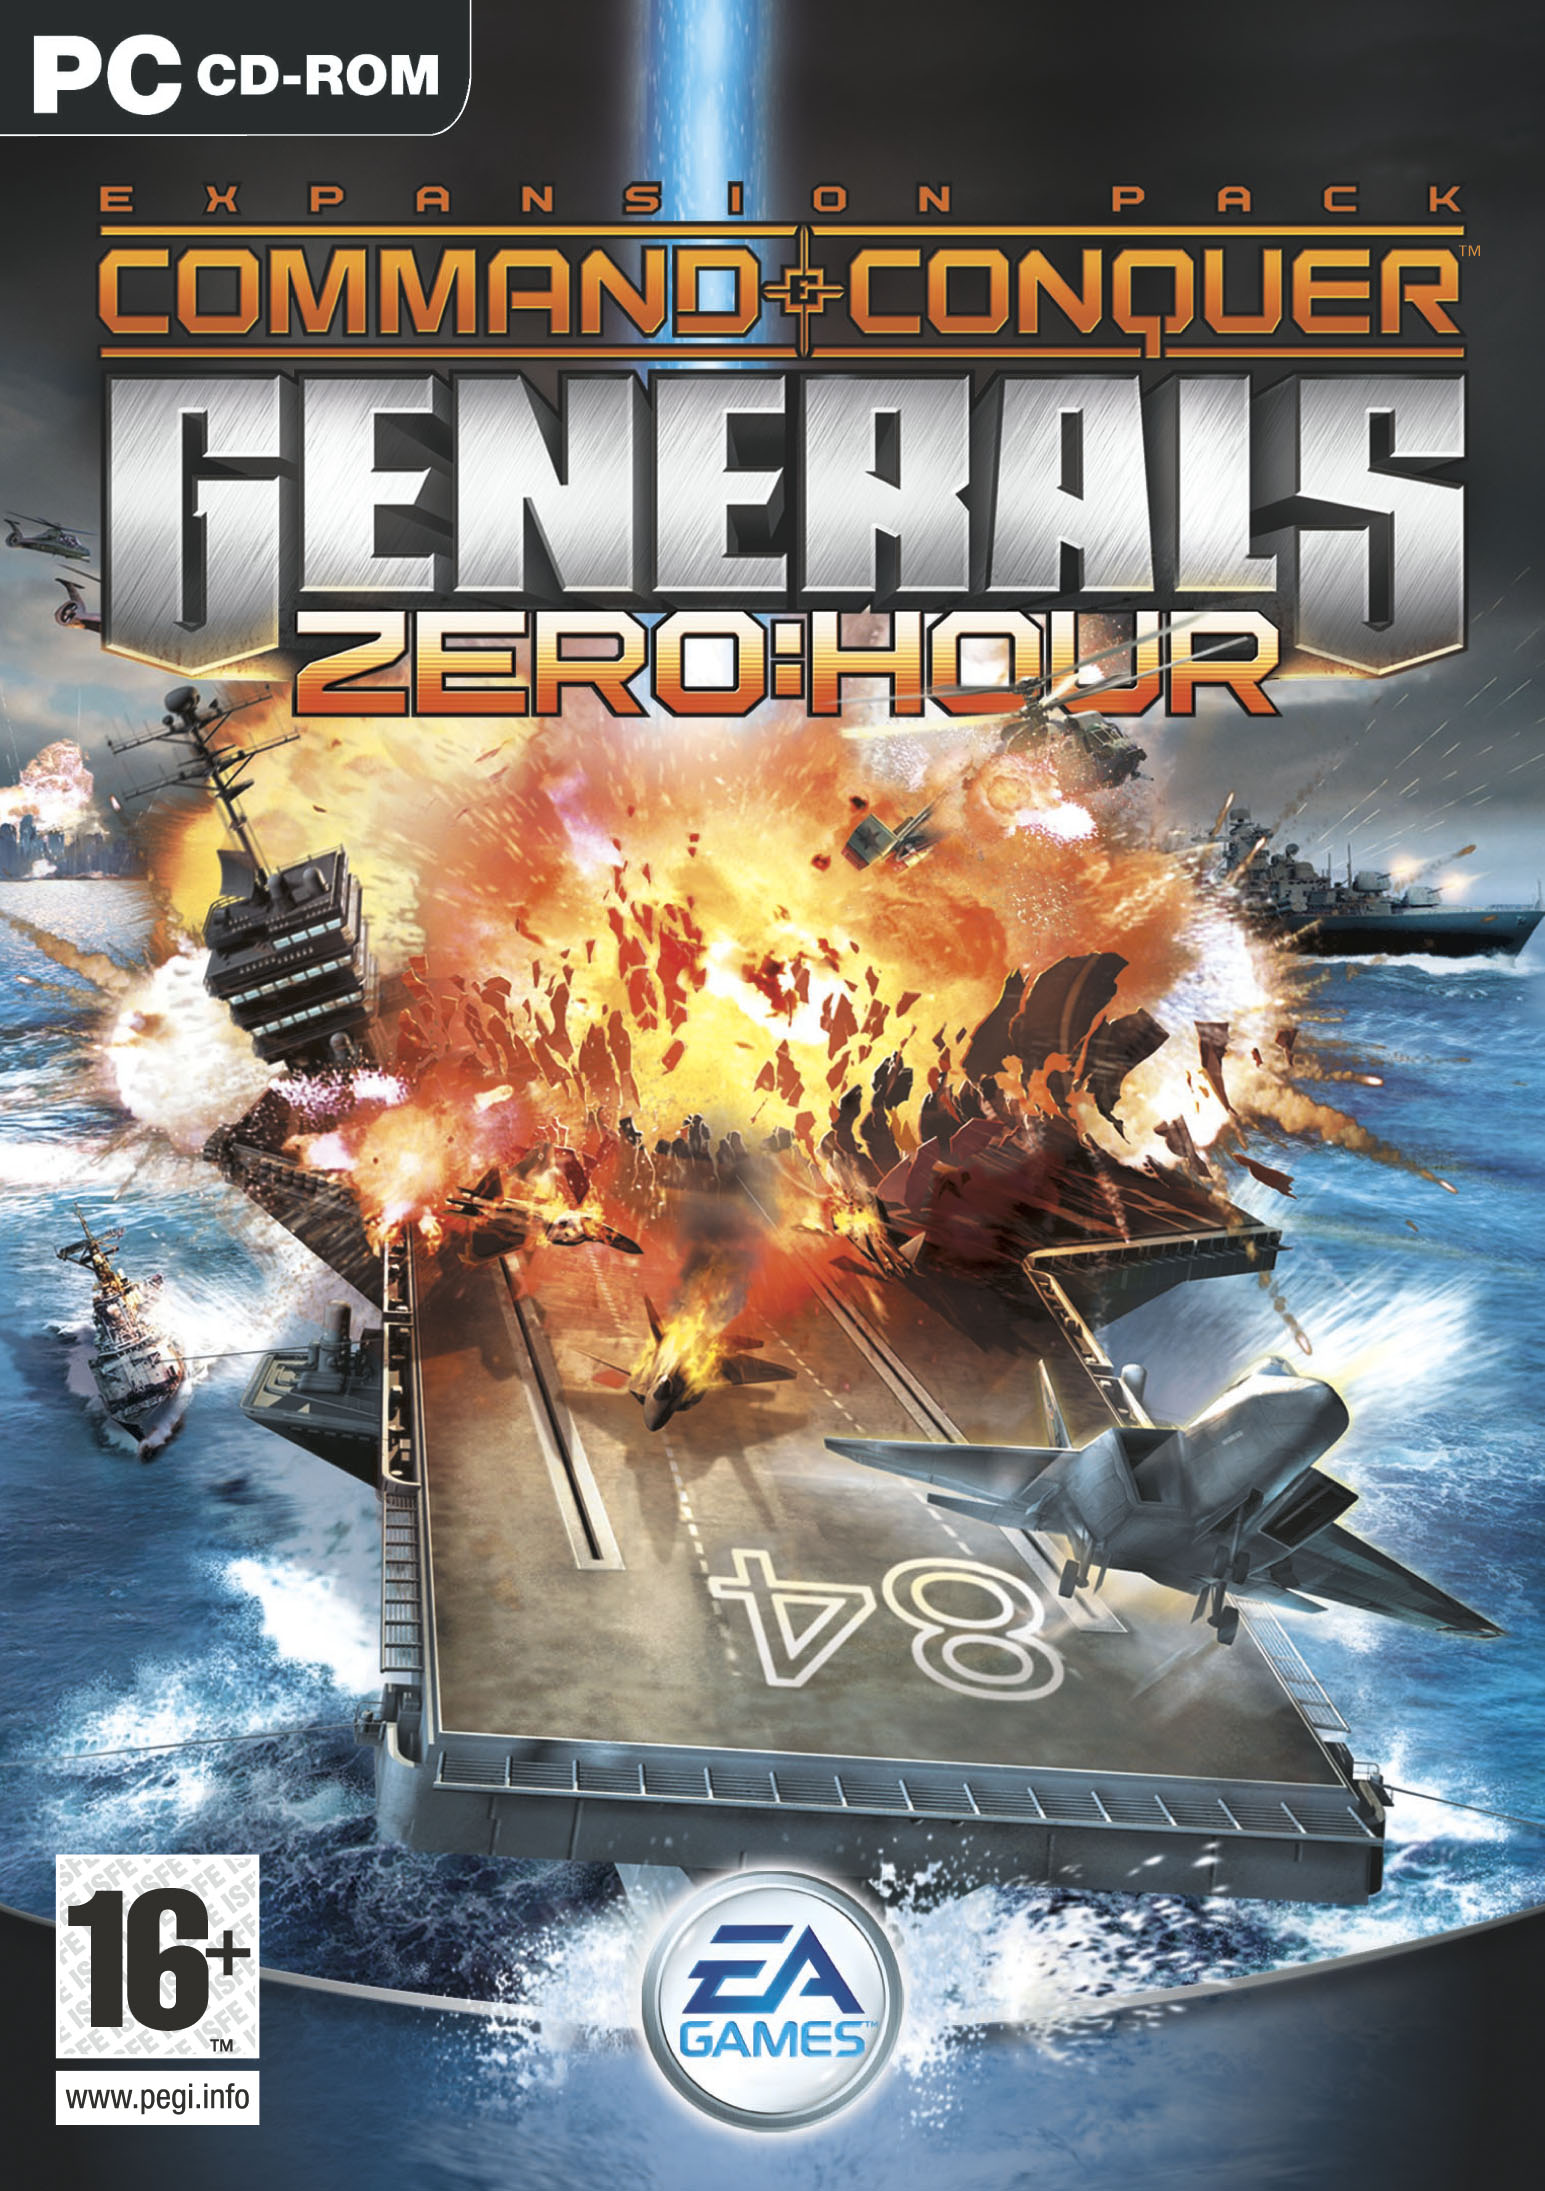 command and conquer generals 2 single player campaign